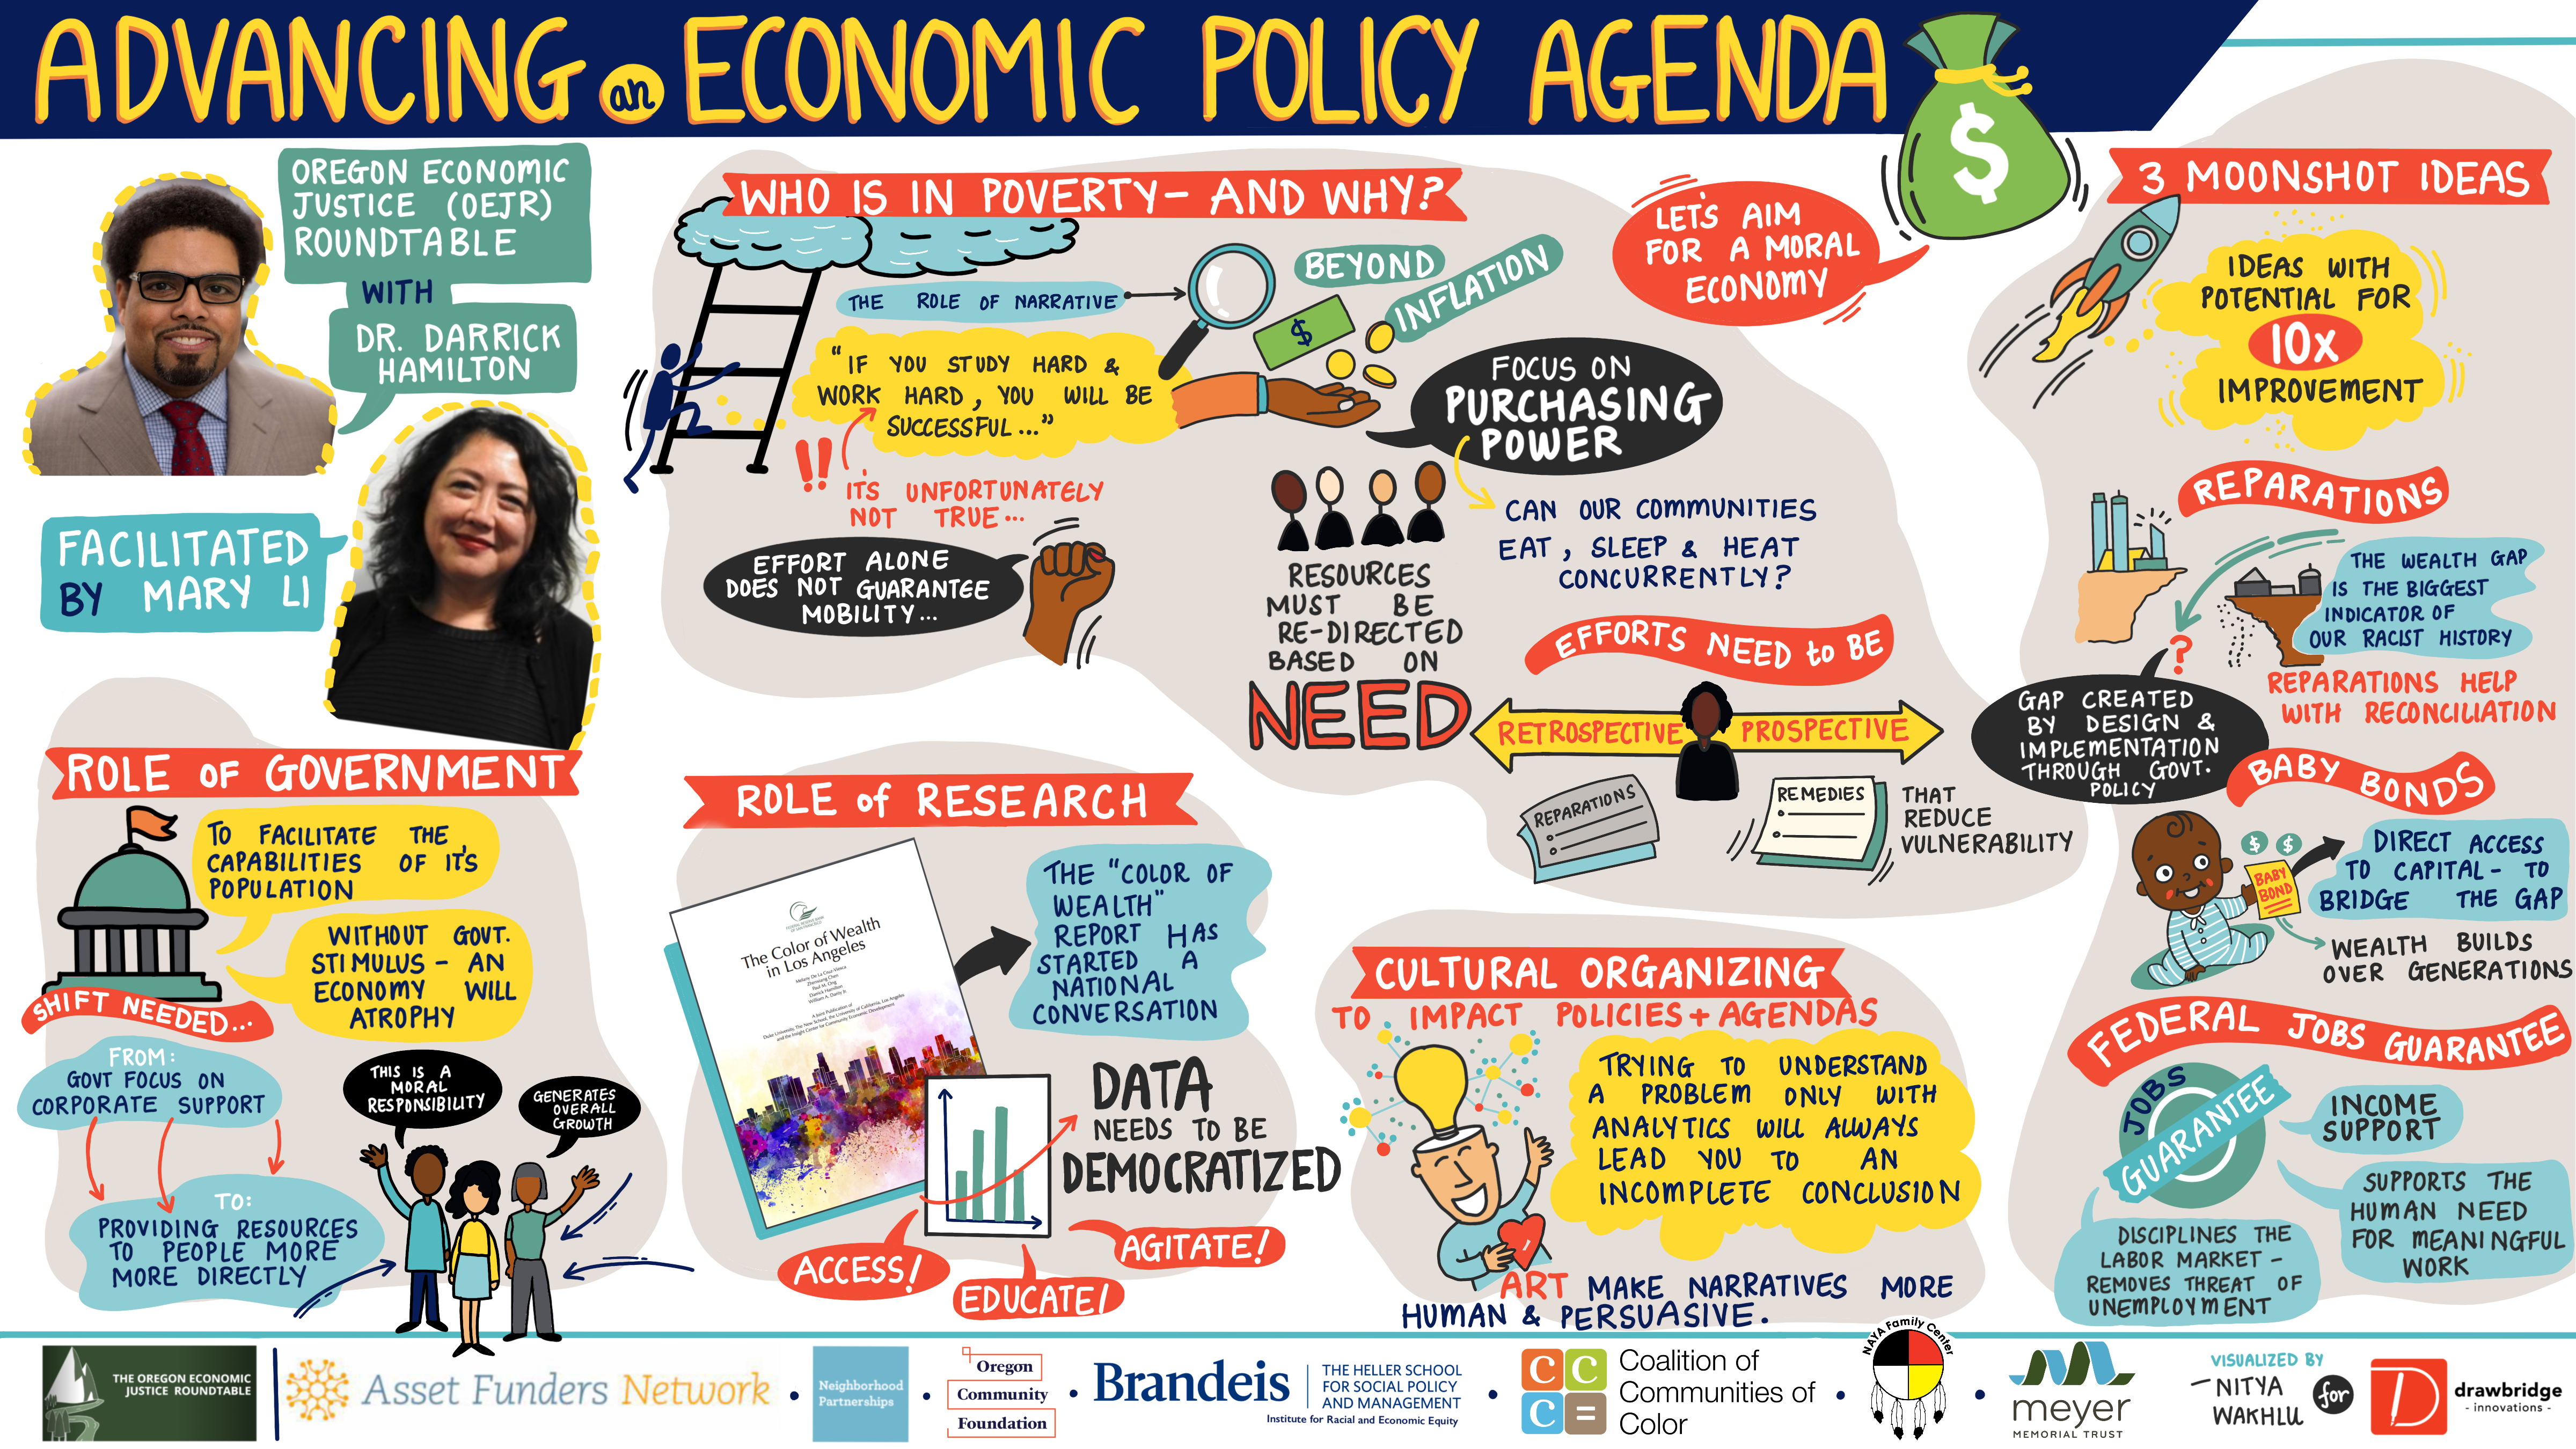 Pictorial of the Advancing Economic Policy Agenda